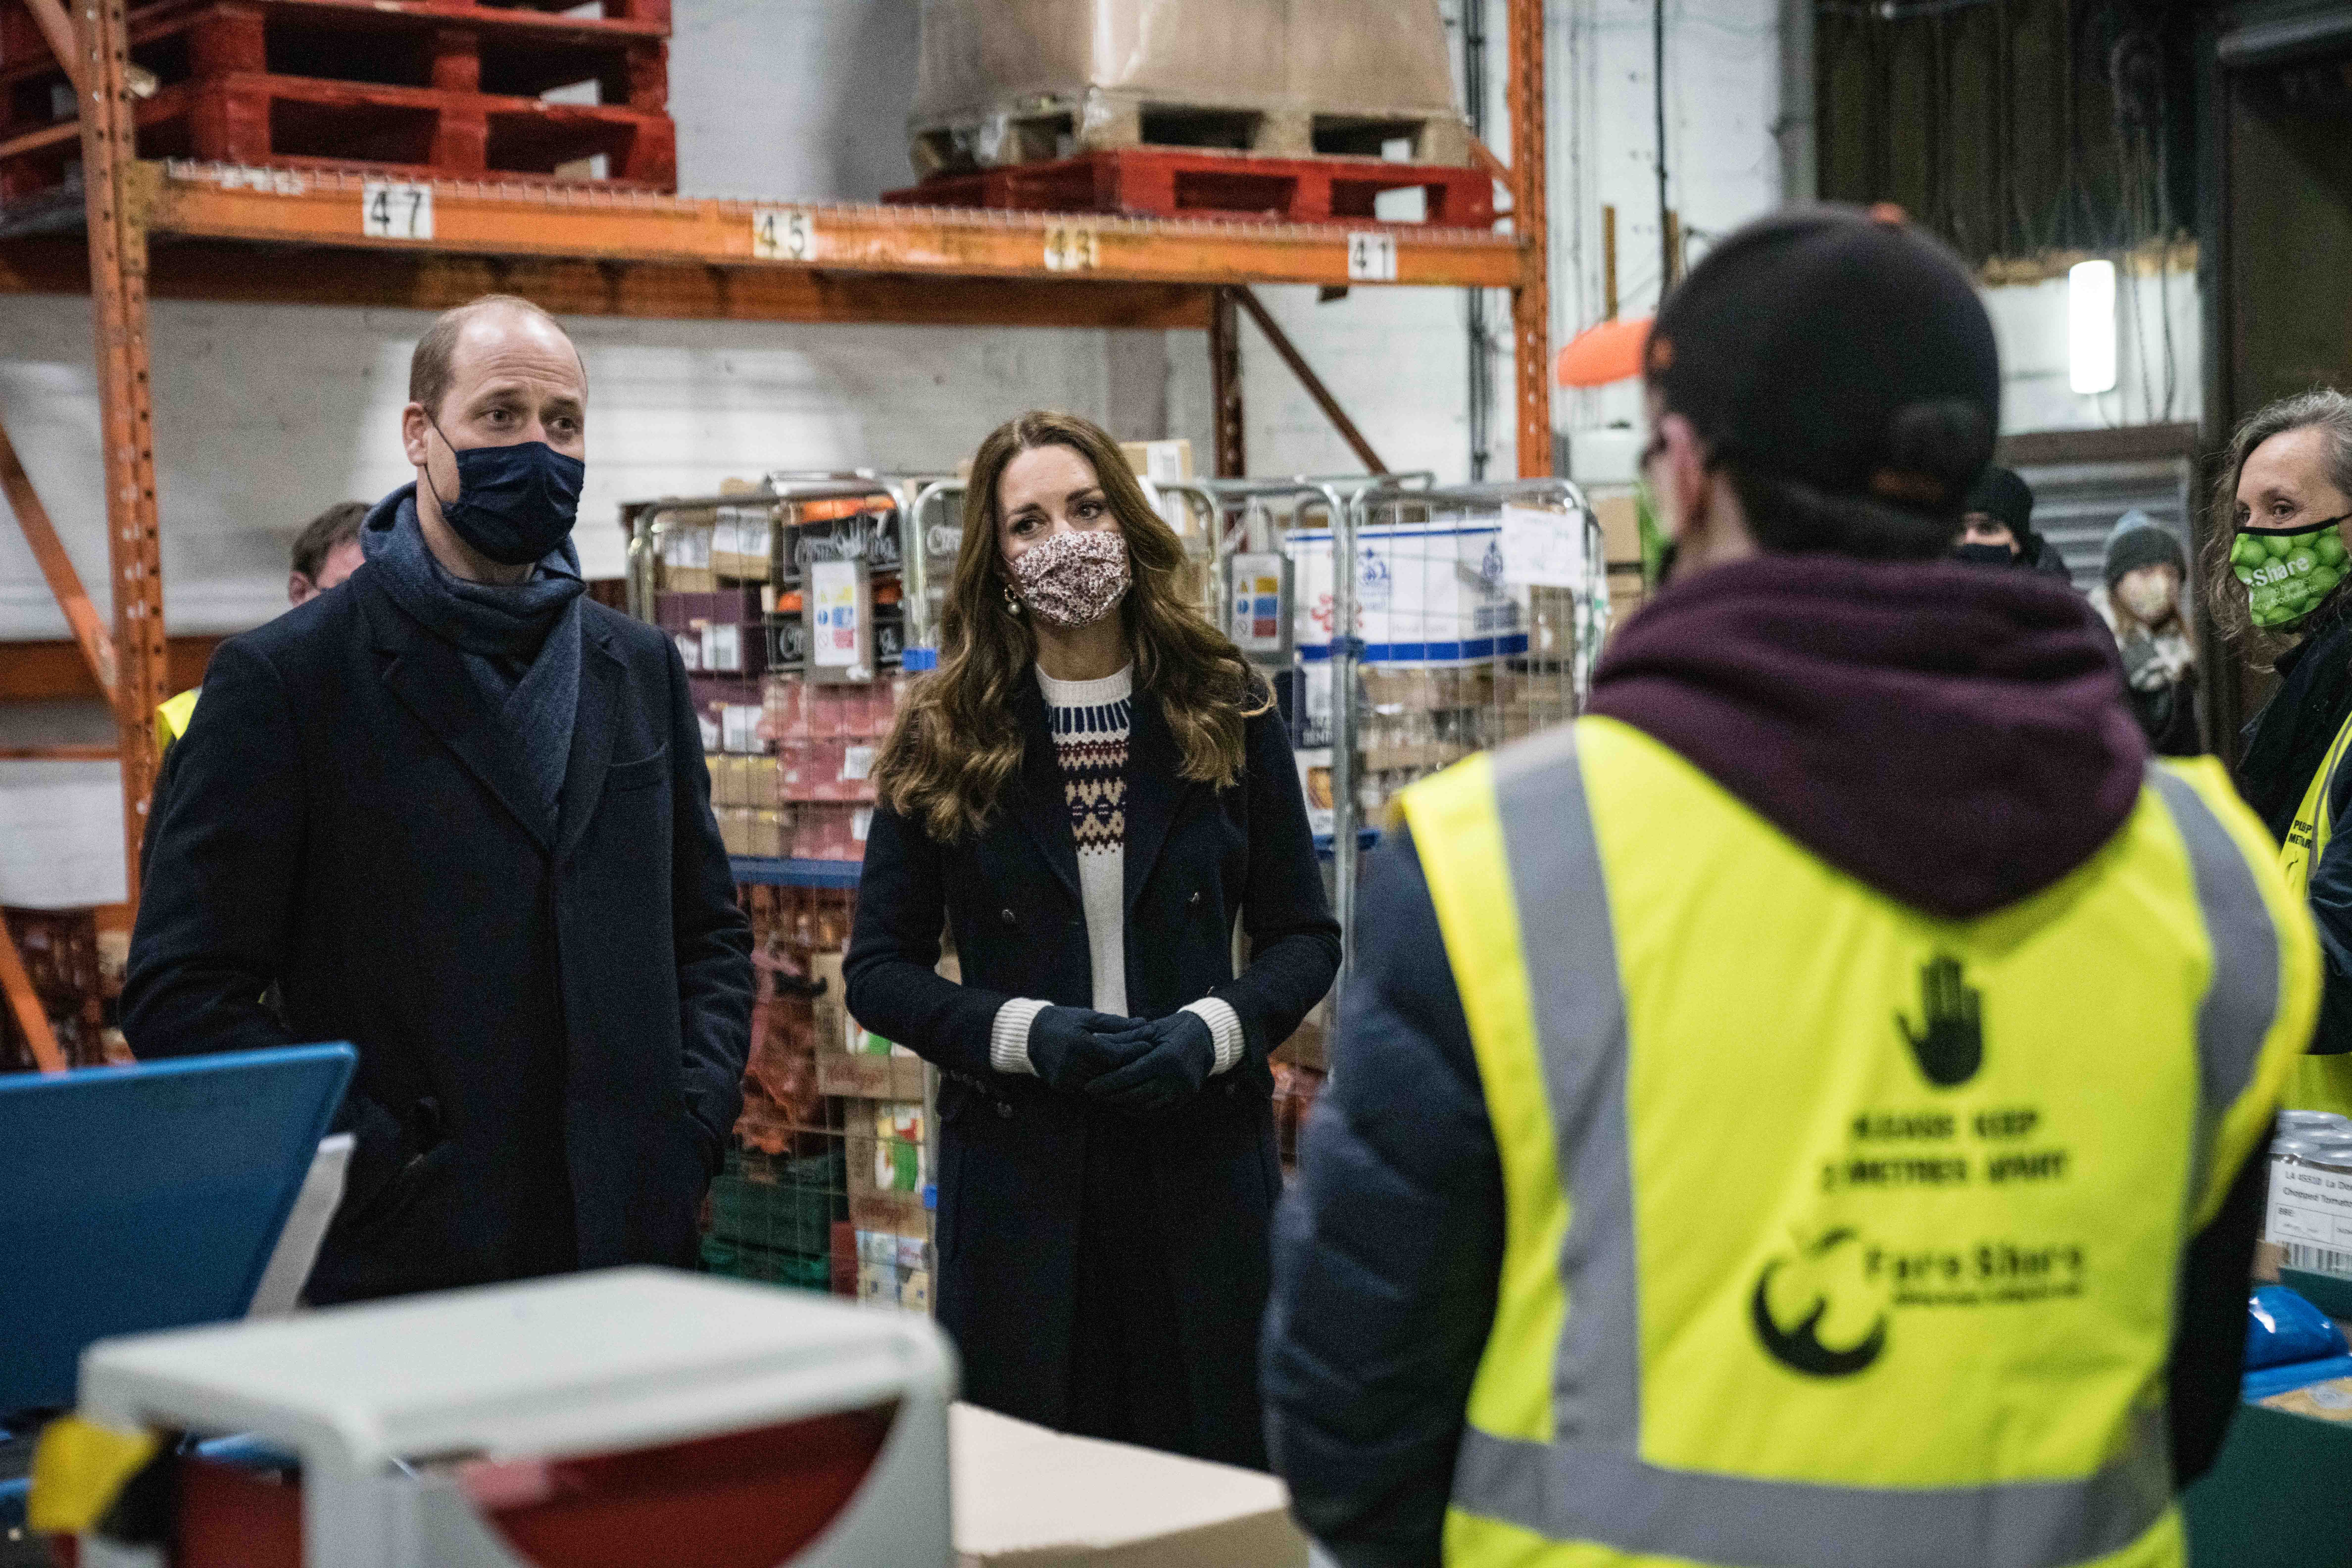 The Duke and Duchess of Cambridge visit Fareshare in Manchester.